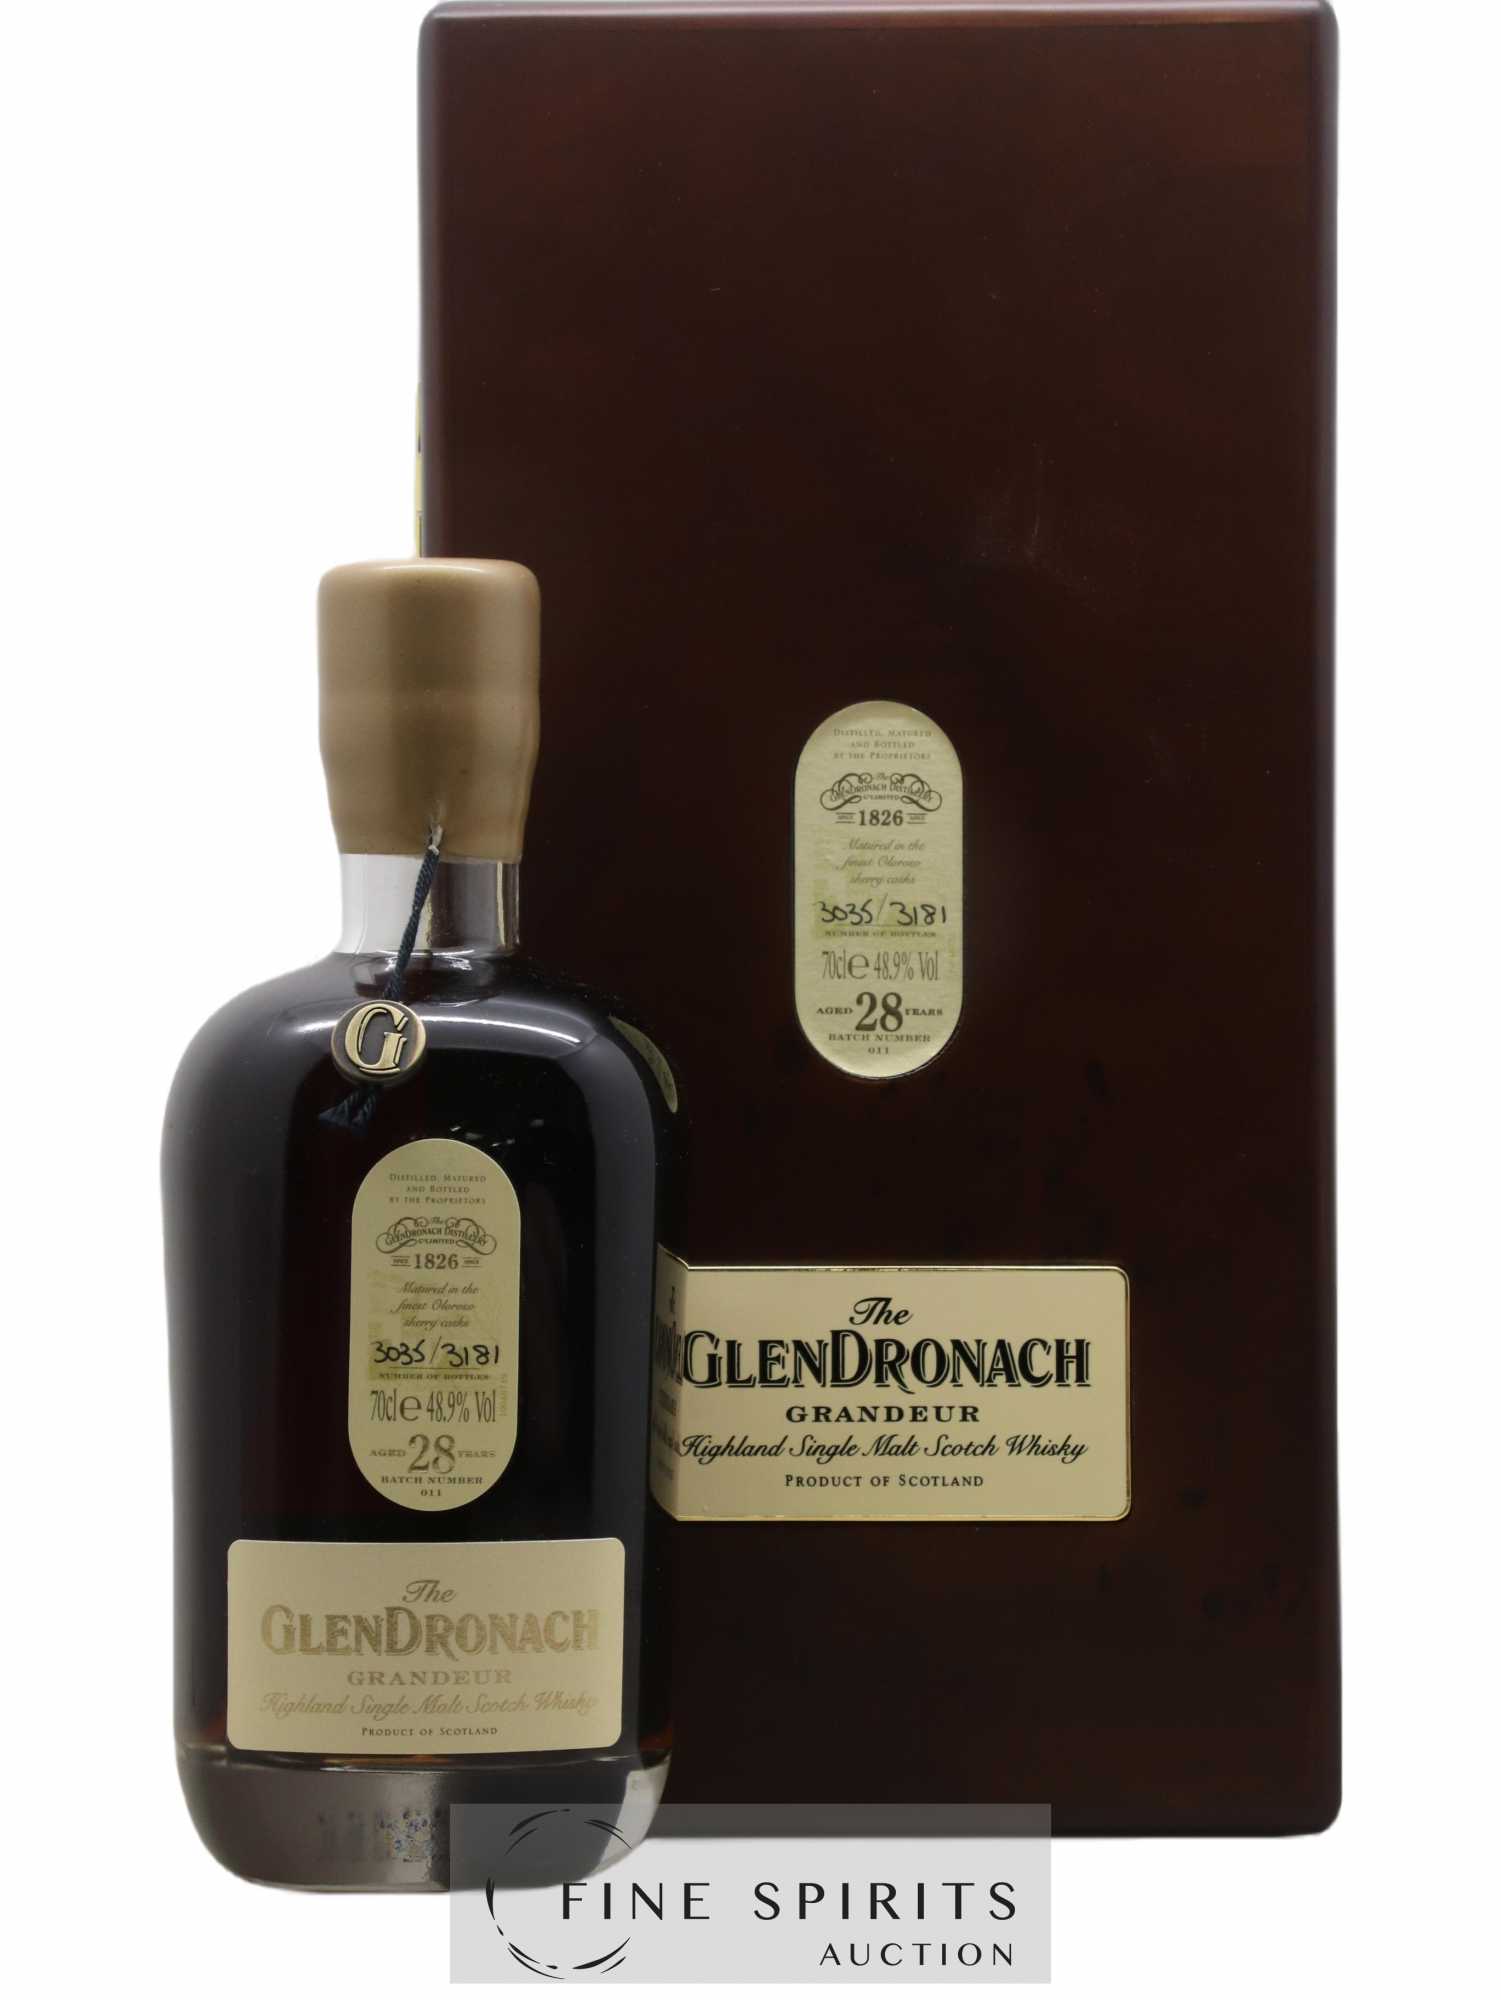 The Glendronach 28 years Of. Grandeur Batch 011 - One of 3181